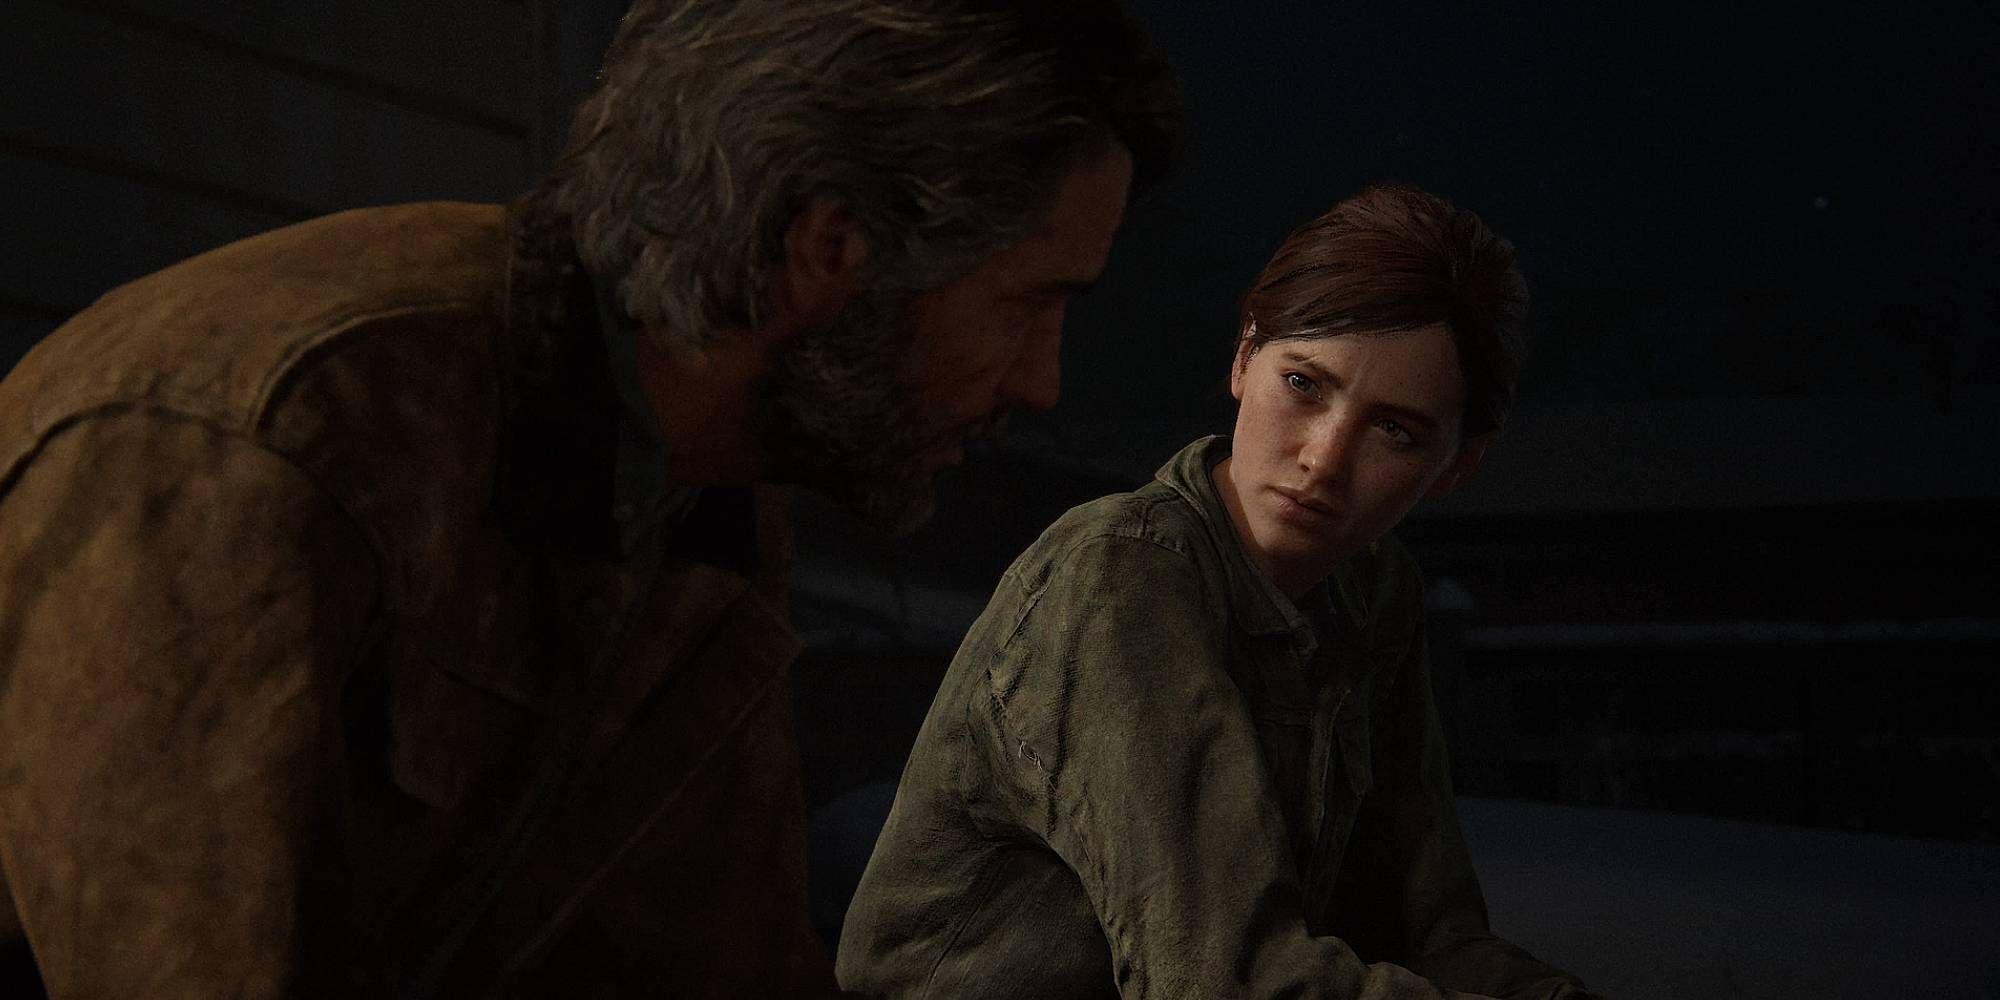 Ellie looks concered to an older Joe at night in The Last Of Us Part 2